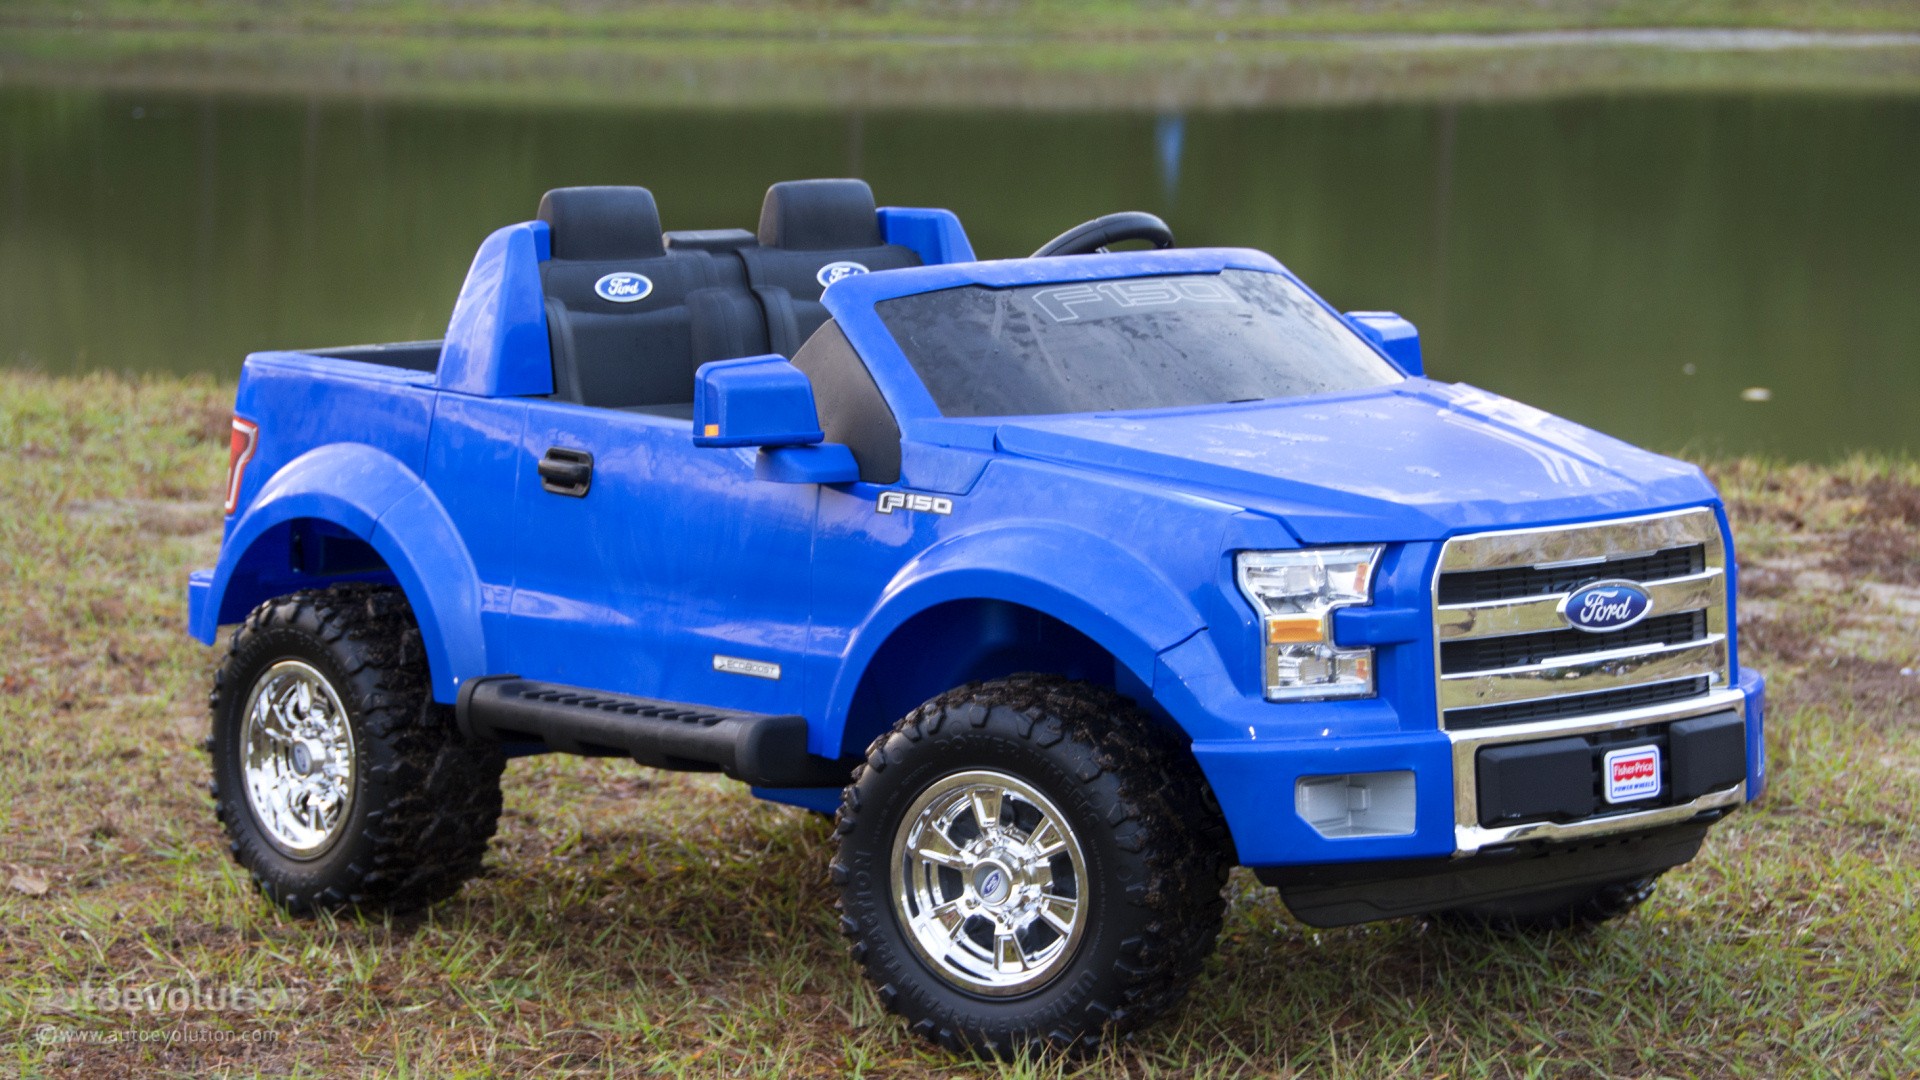 we-review-the-power-wheels-ford-f-150-the-best-kid-trucker-gift-photo-gallery_6.jpg